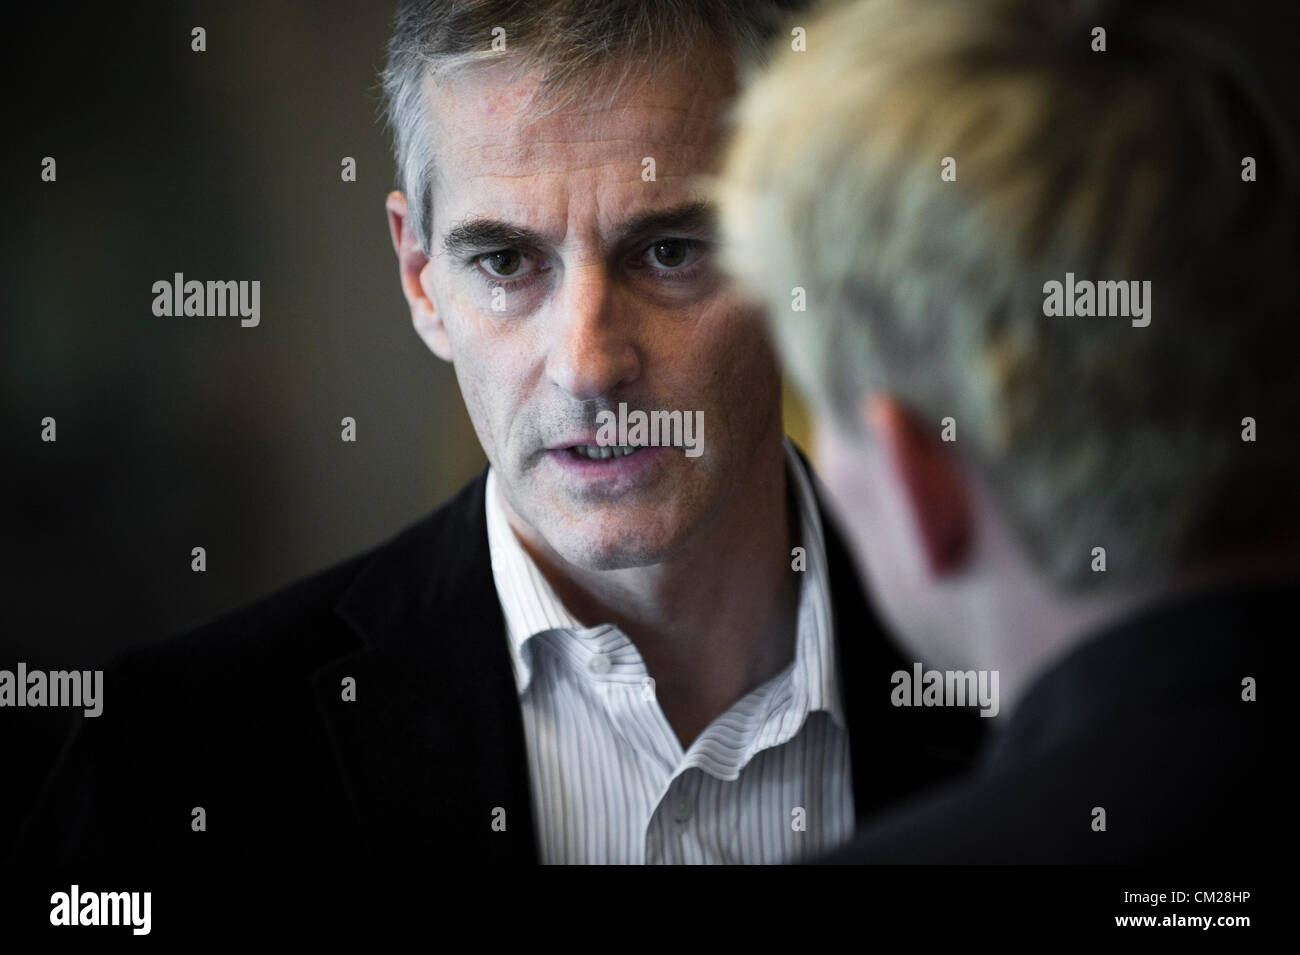 Oslo, Norway. 18/09/2012. Minister of foreign affairs in Norway Jonas Gahr Store. Stock Photo